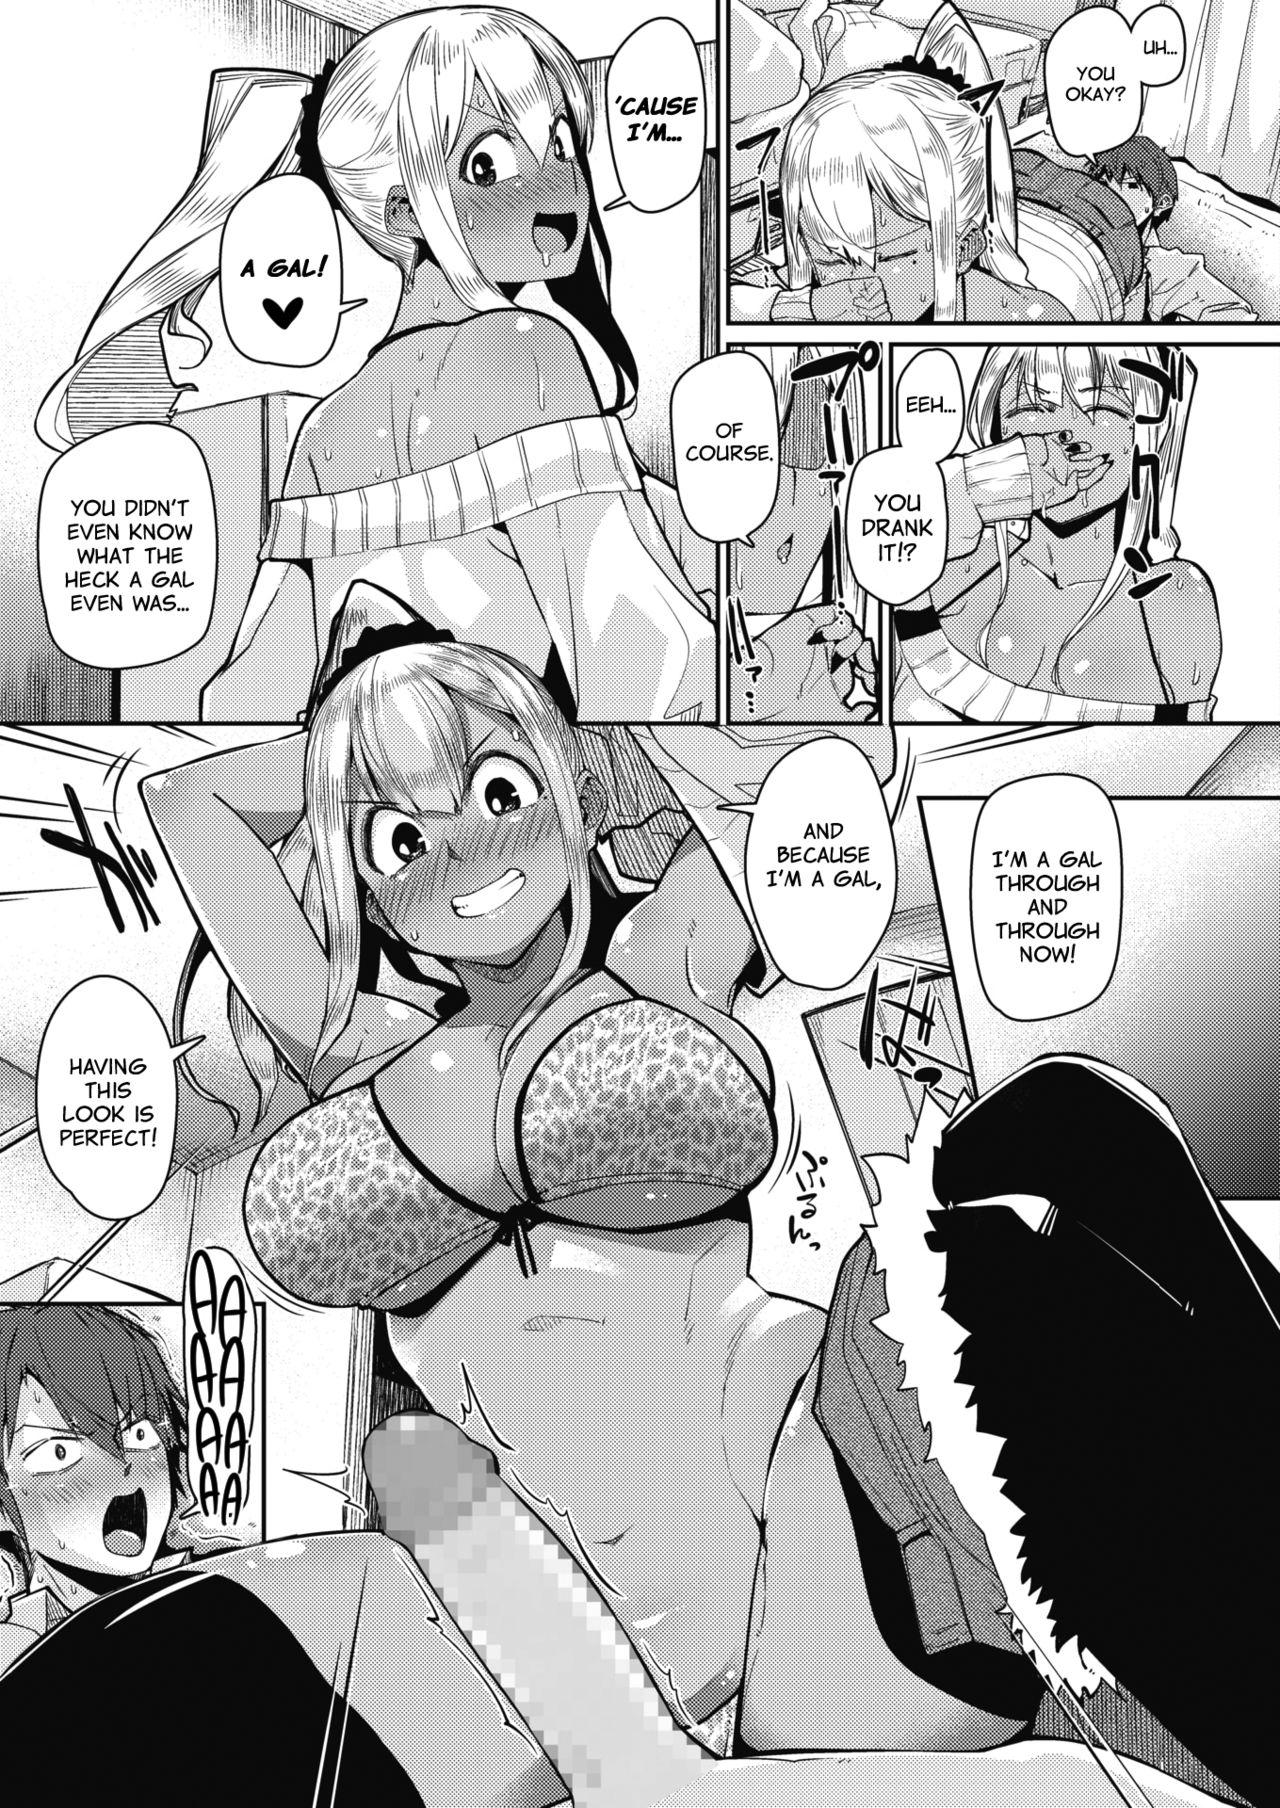 Secret Gekkan "Za Bicchi" wo Mita Onna no Hannou ni Tsuite | About the Reaction of the Girl Who Saw "The Bitch Monthly" Foot Job - Page 11